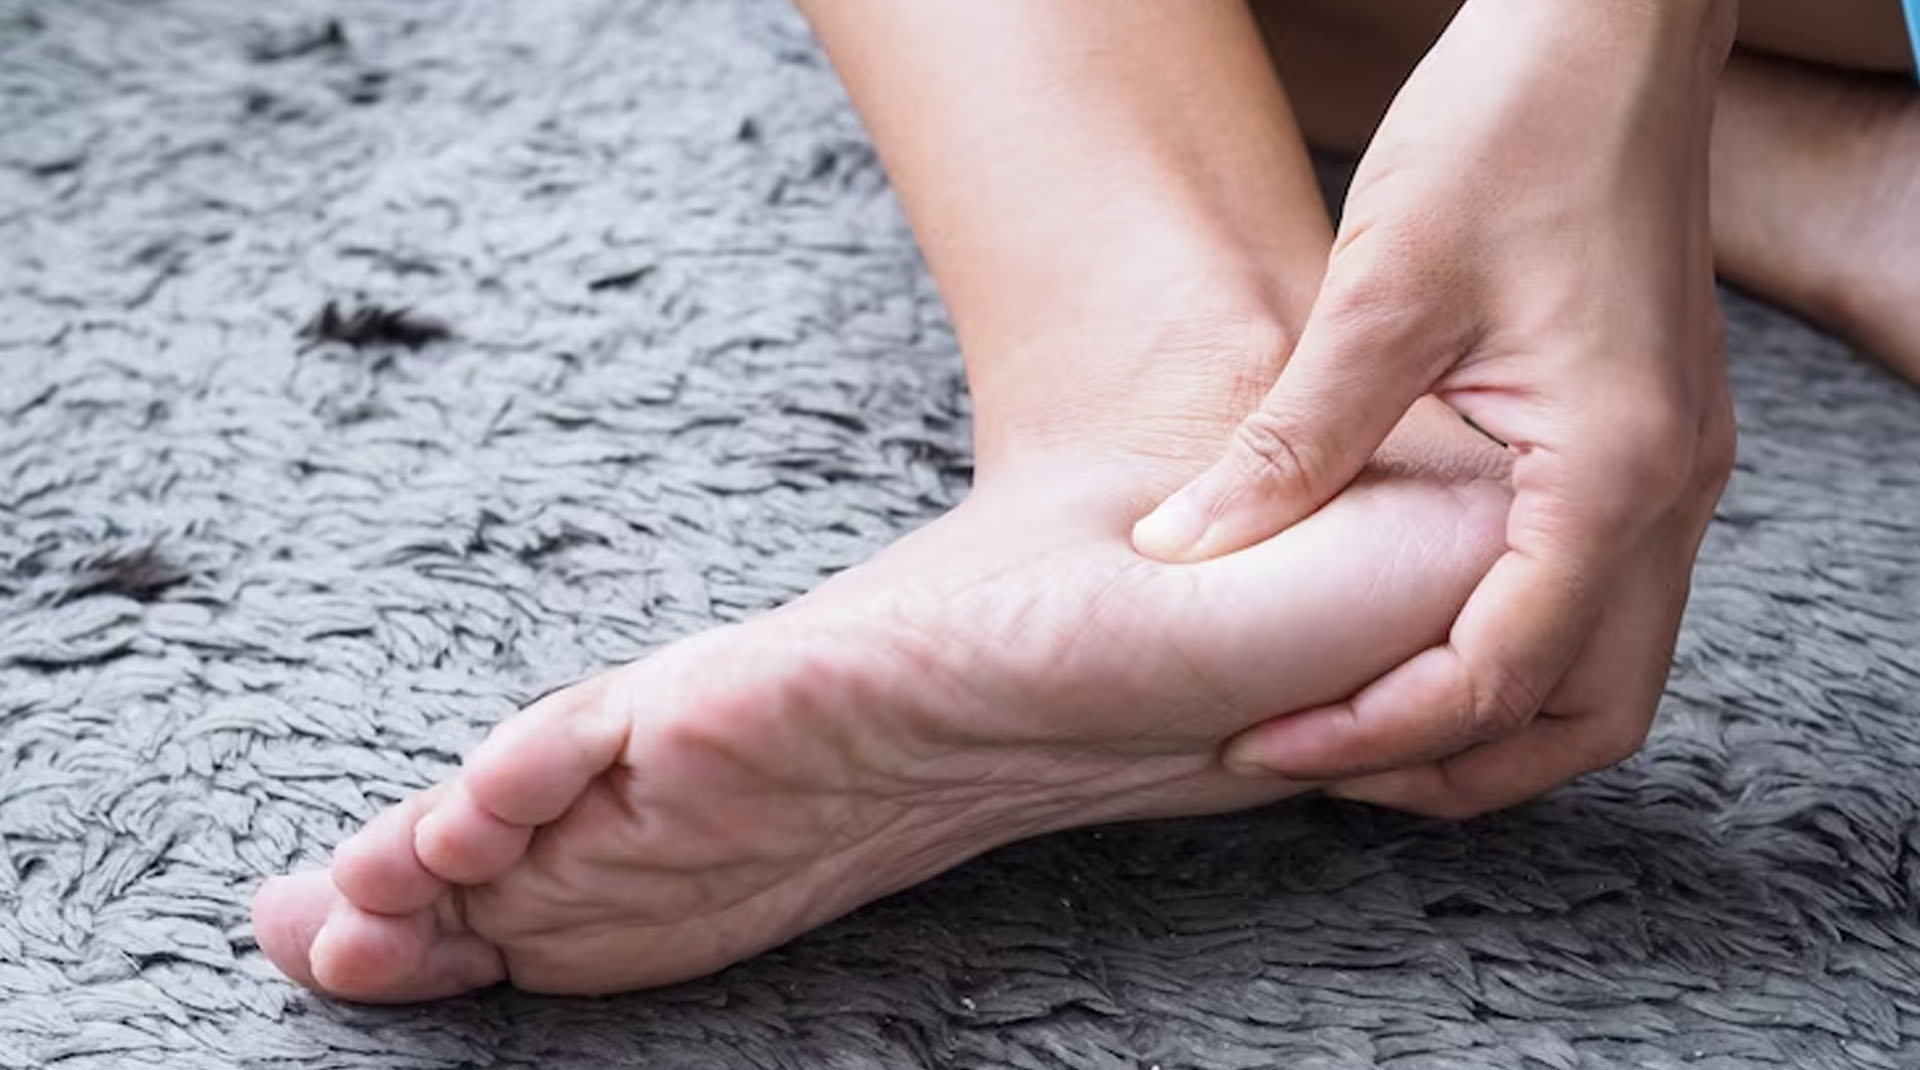 What are the Home Remedies for Dry Feet?